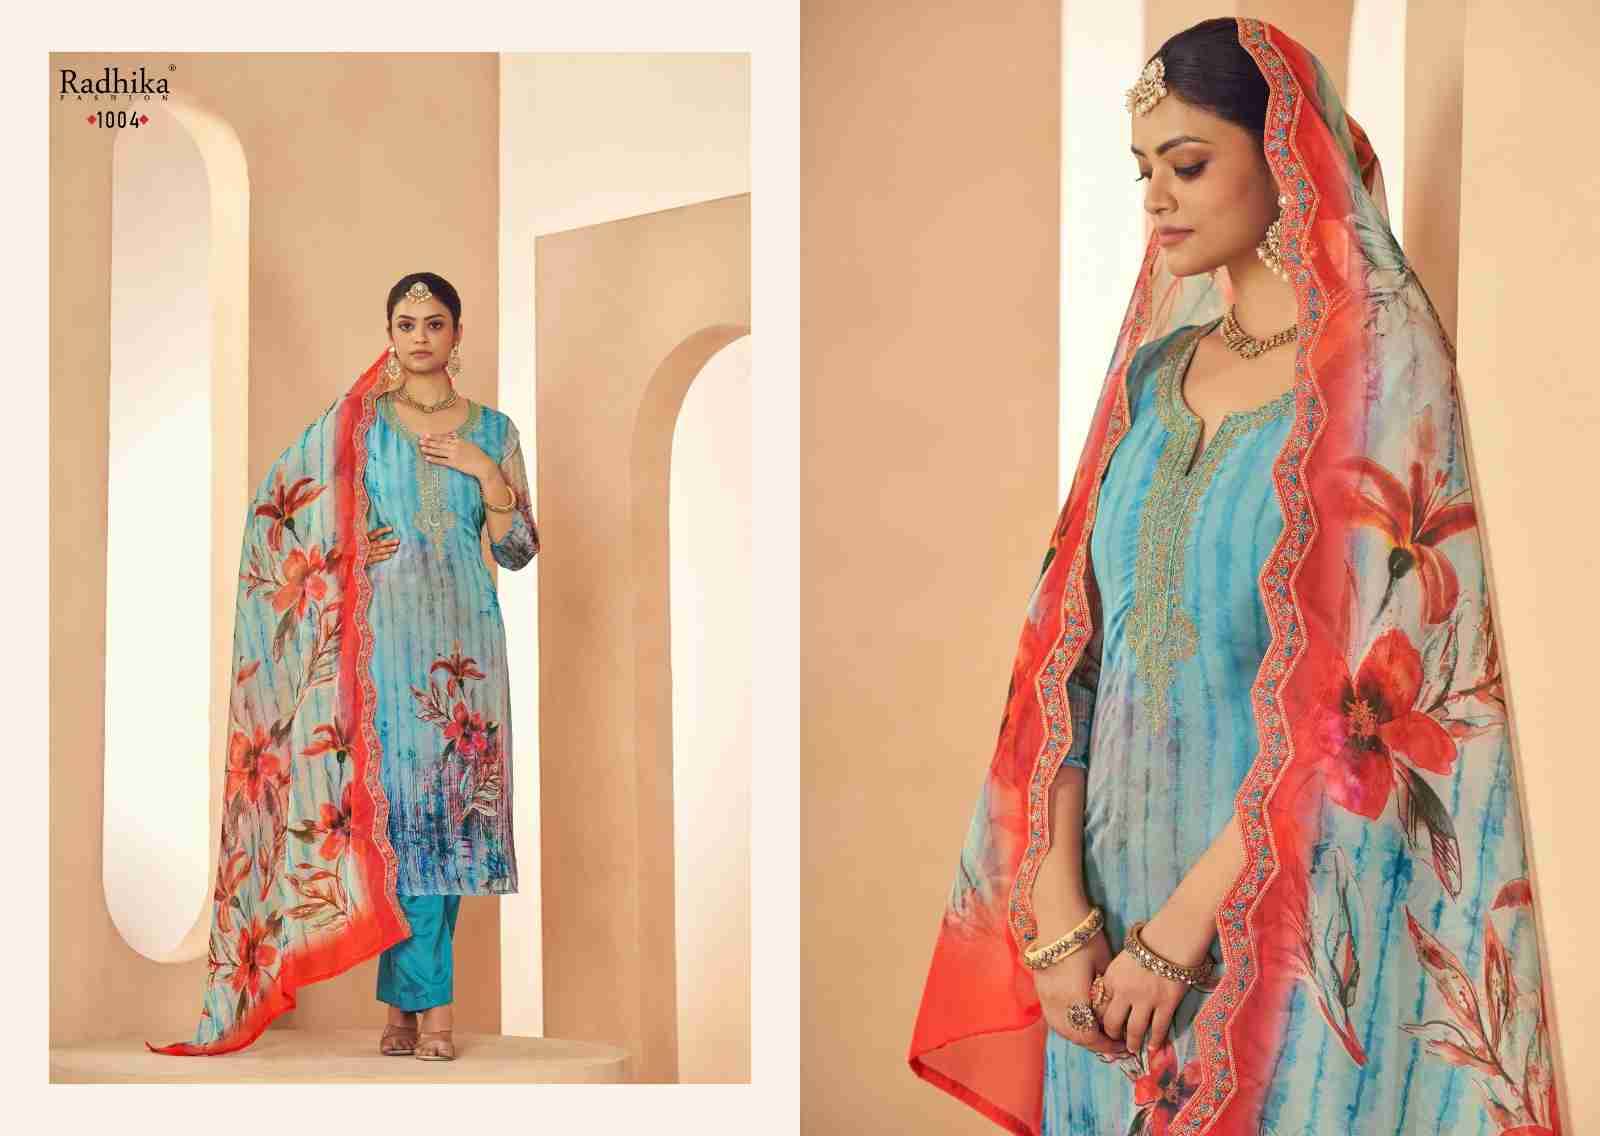 Shezlin By Azara 1001 To 1004 Series Beautiful Festive Suits Colorful Stylish Fancy Casual Wear & Ethnic Wear Organza Print Dresses At Wholesale Price